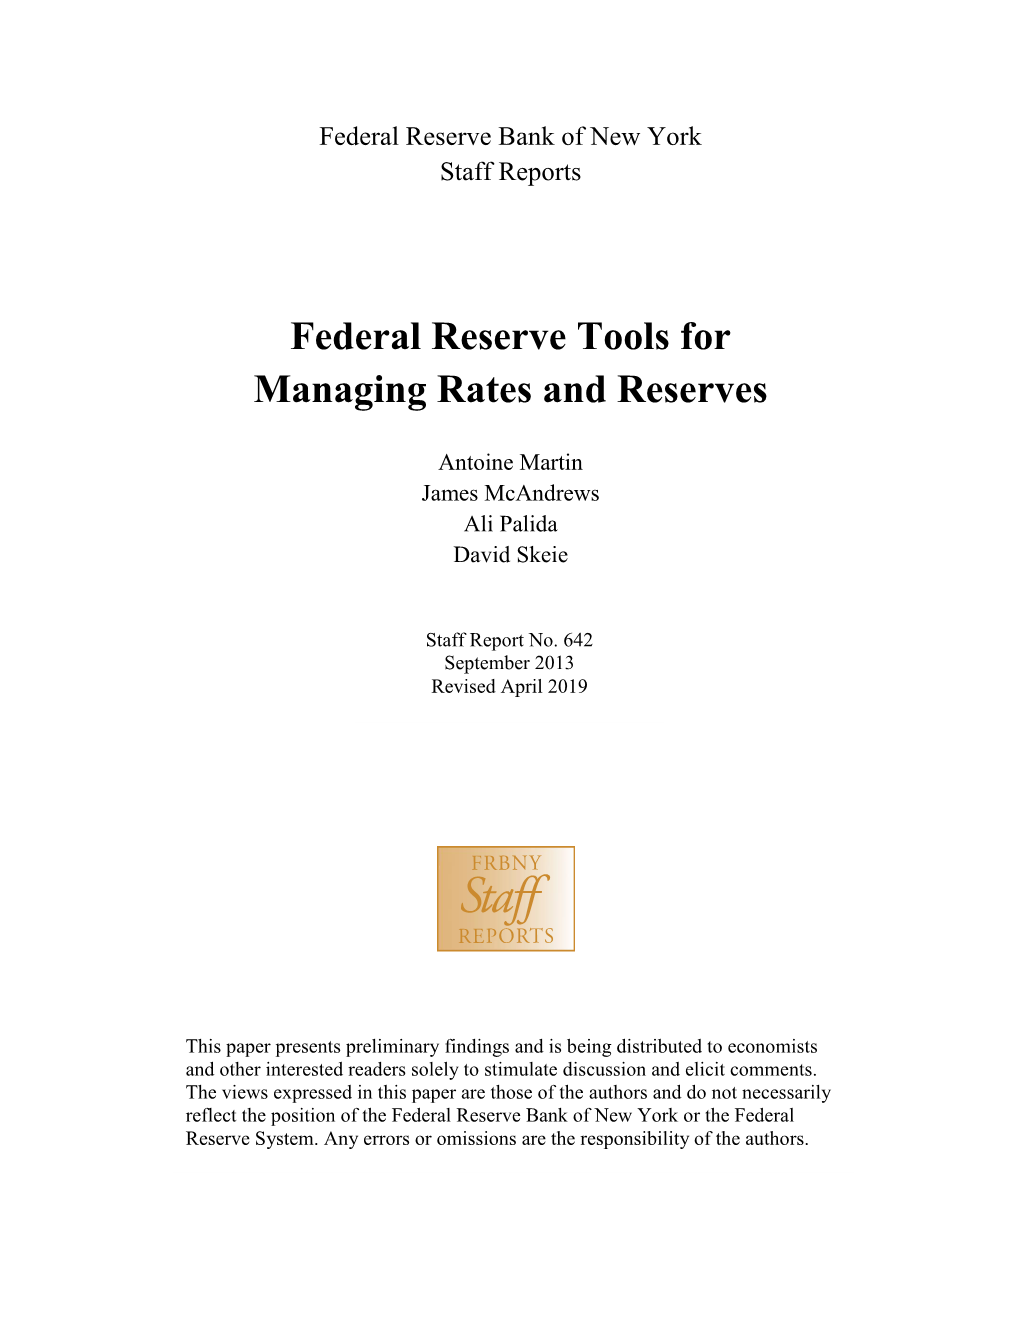 Federal Reserve Tools for Managing Rates and Reserves